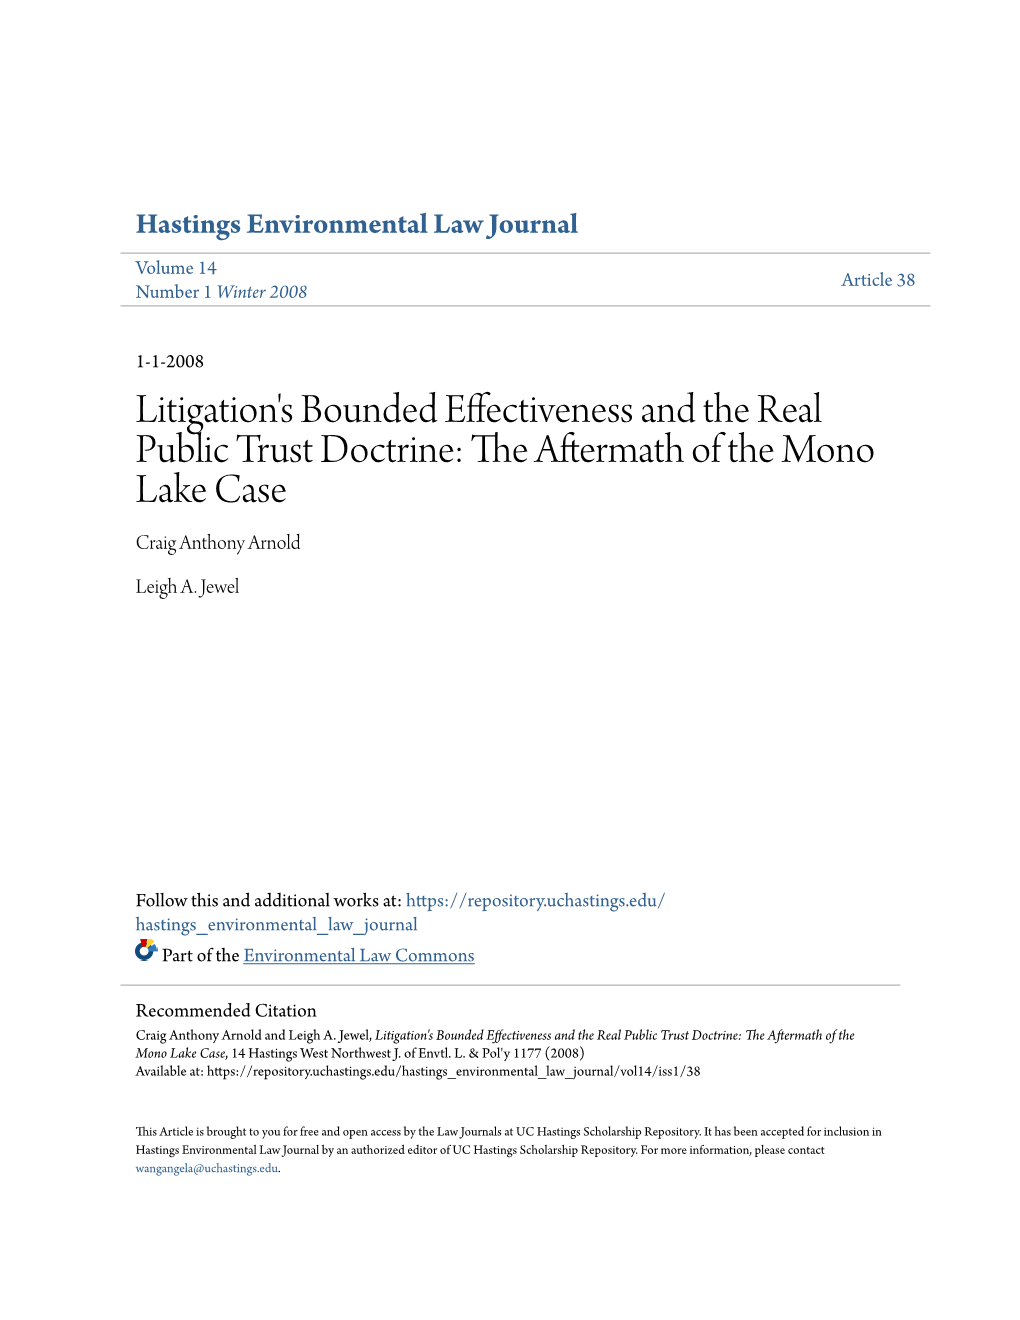 Litigation's Bounded Effectiveness and the Real Public Trust Doctrine: the Aftermath of the Mono Lake Case Craig Anthony Arnold